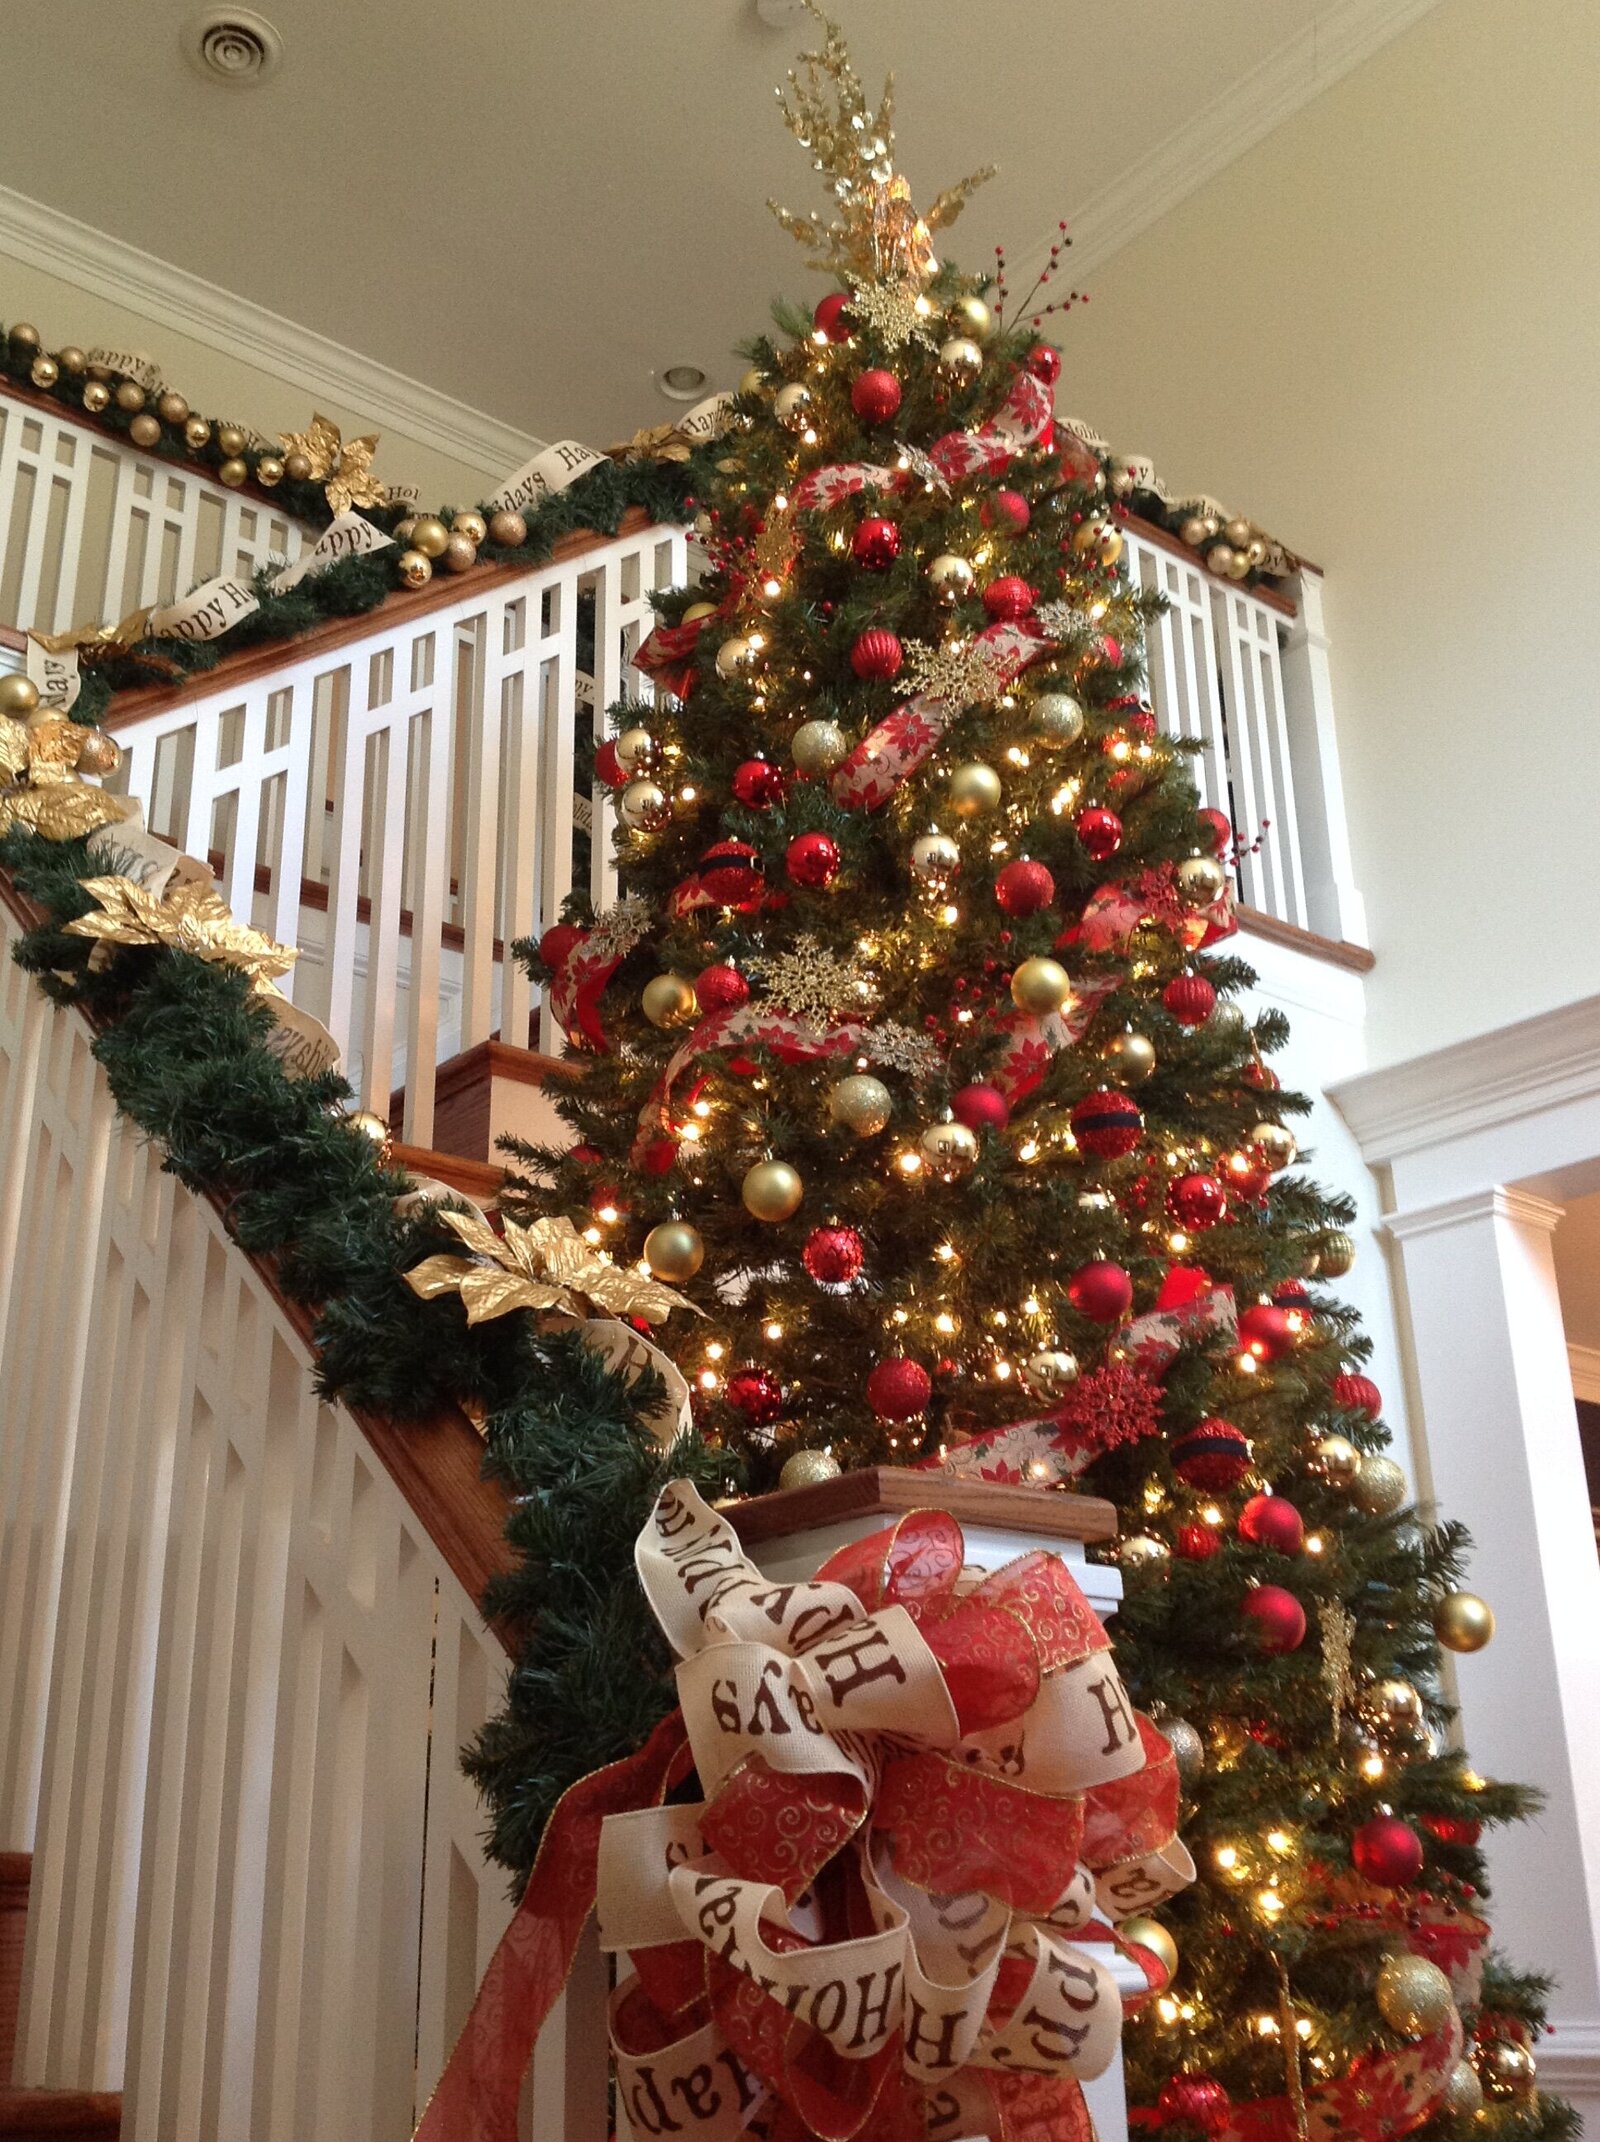 Bedeckers Interiors - Kristine Gregory - Holiday Decor